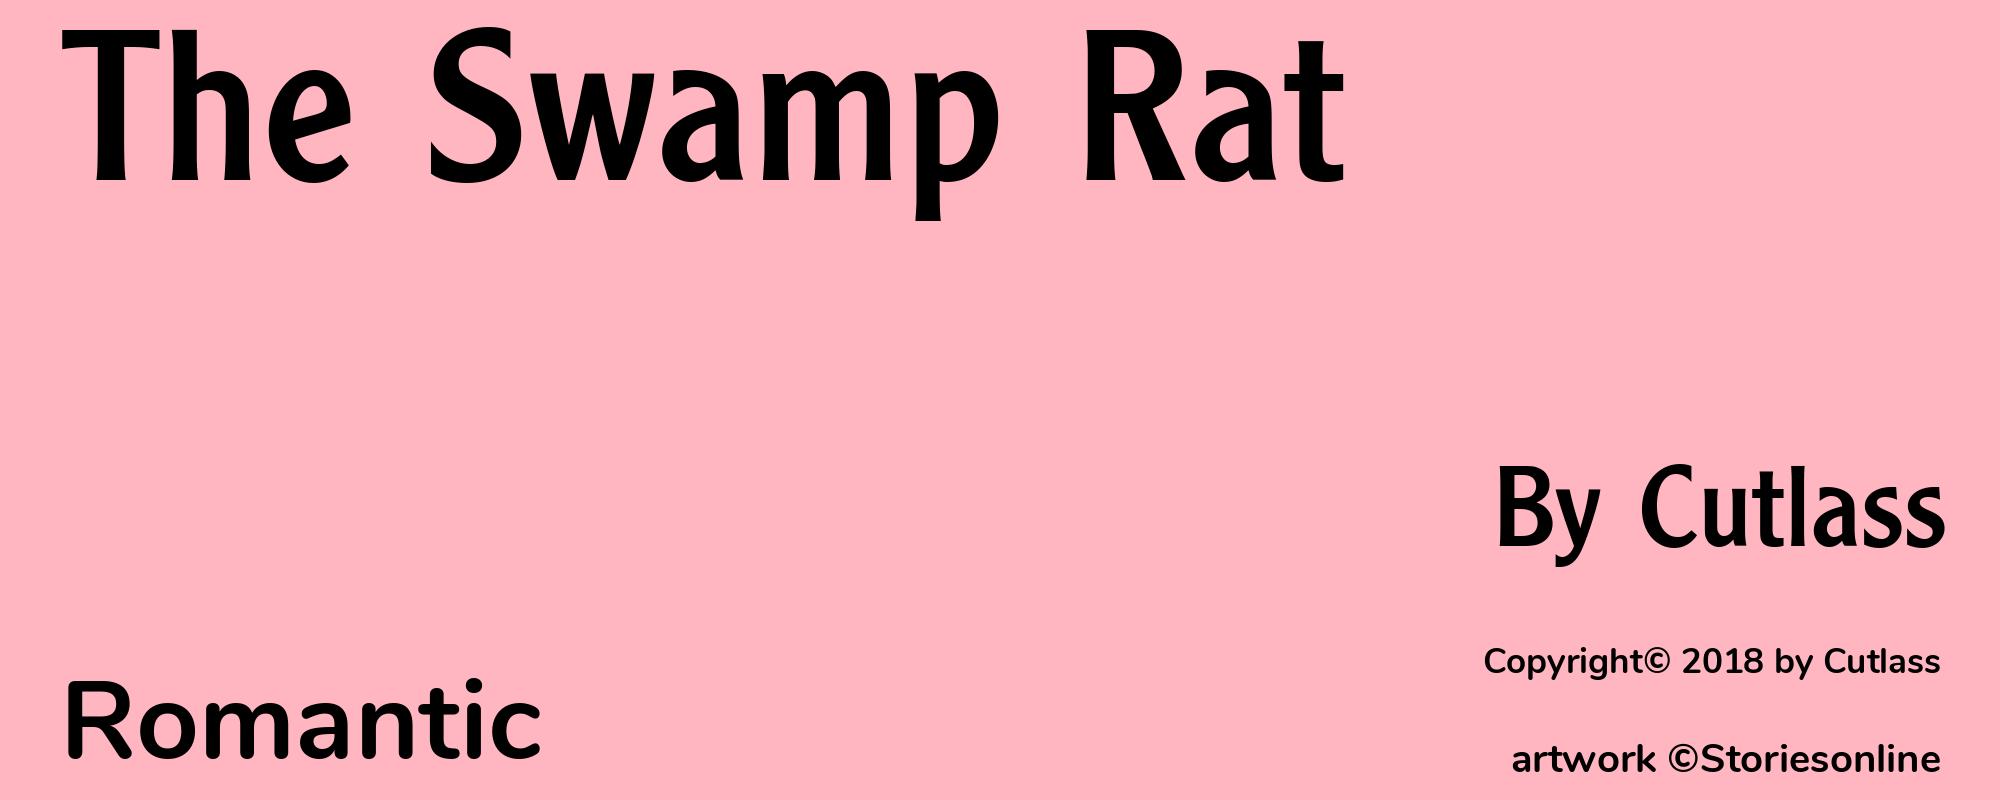 The Swamp Rat - Cover